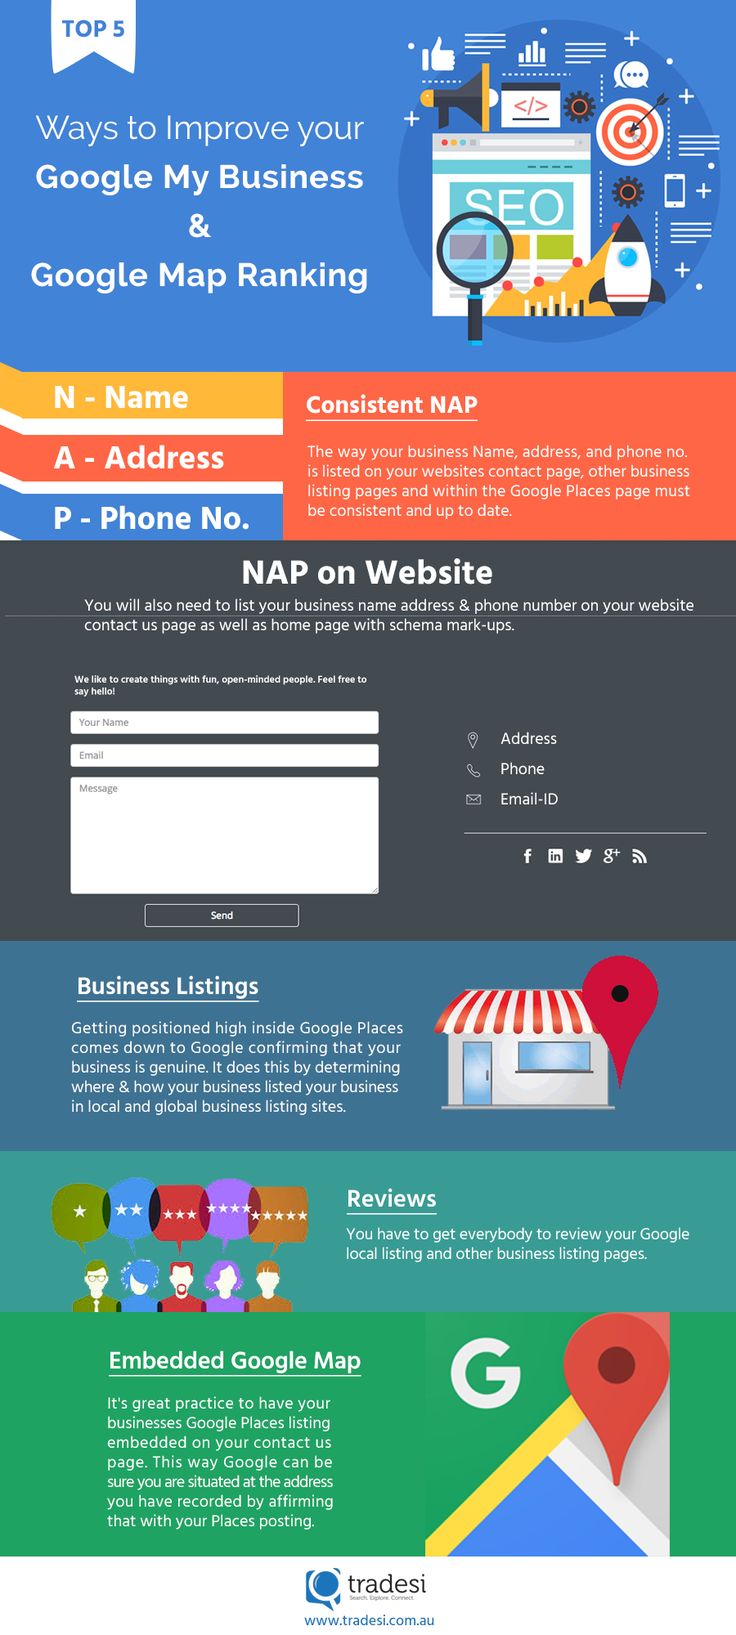 Top 5 Ways to Improve your Google My Business & Google Map Ranking – Infographic